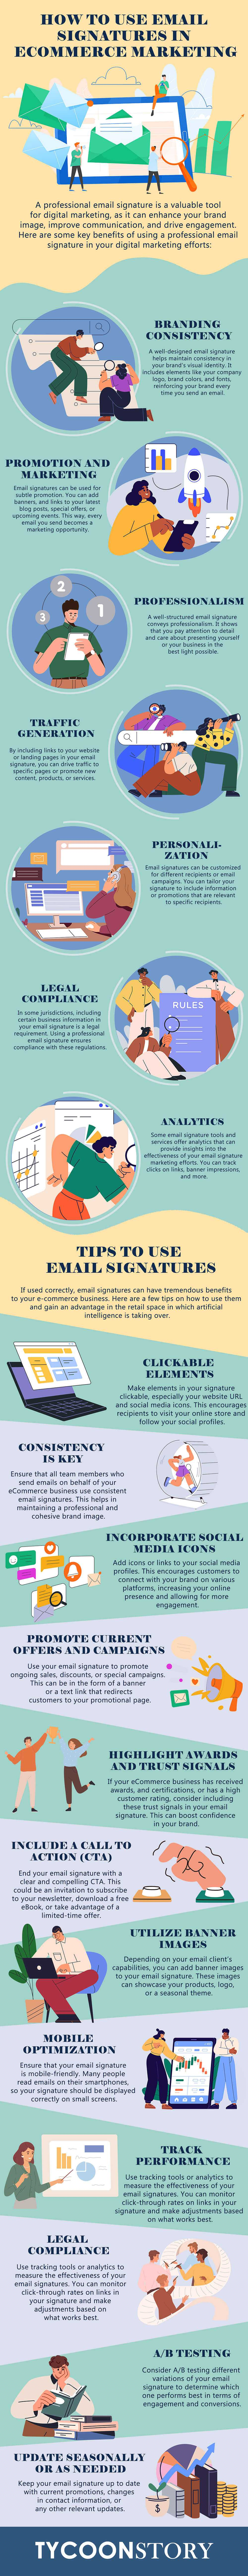 Email signatures how to use them in ecommerce marketing